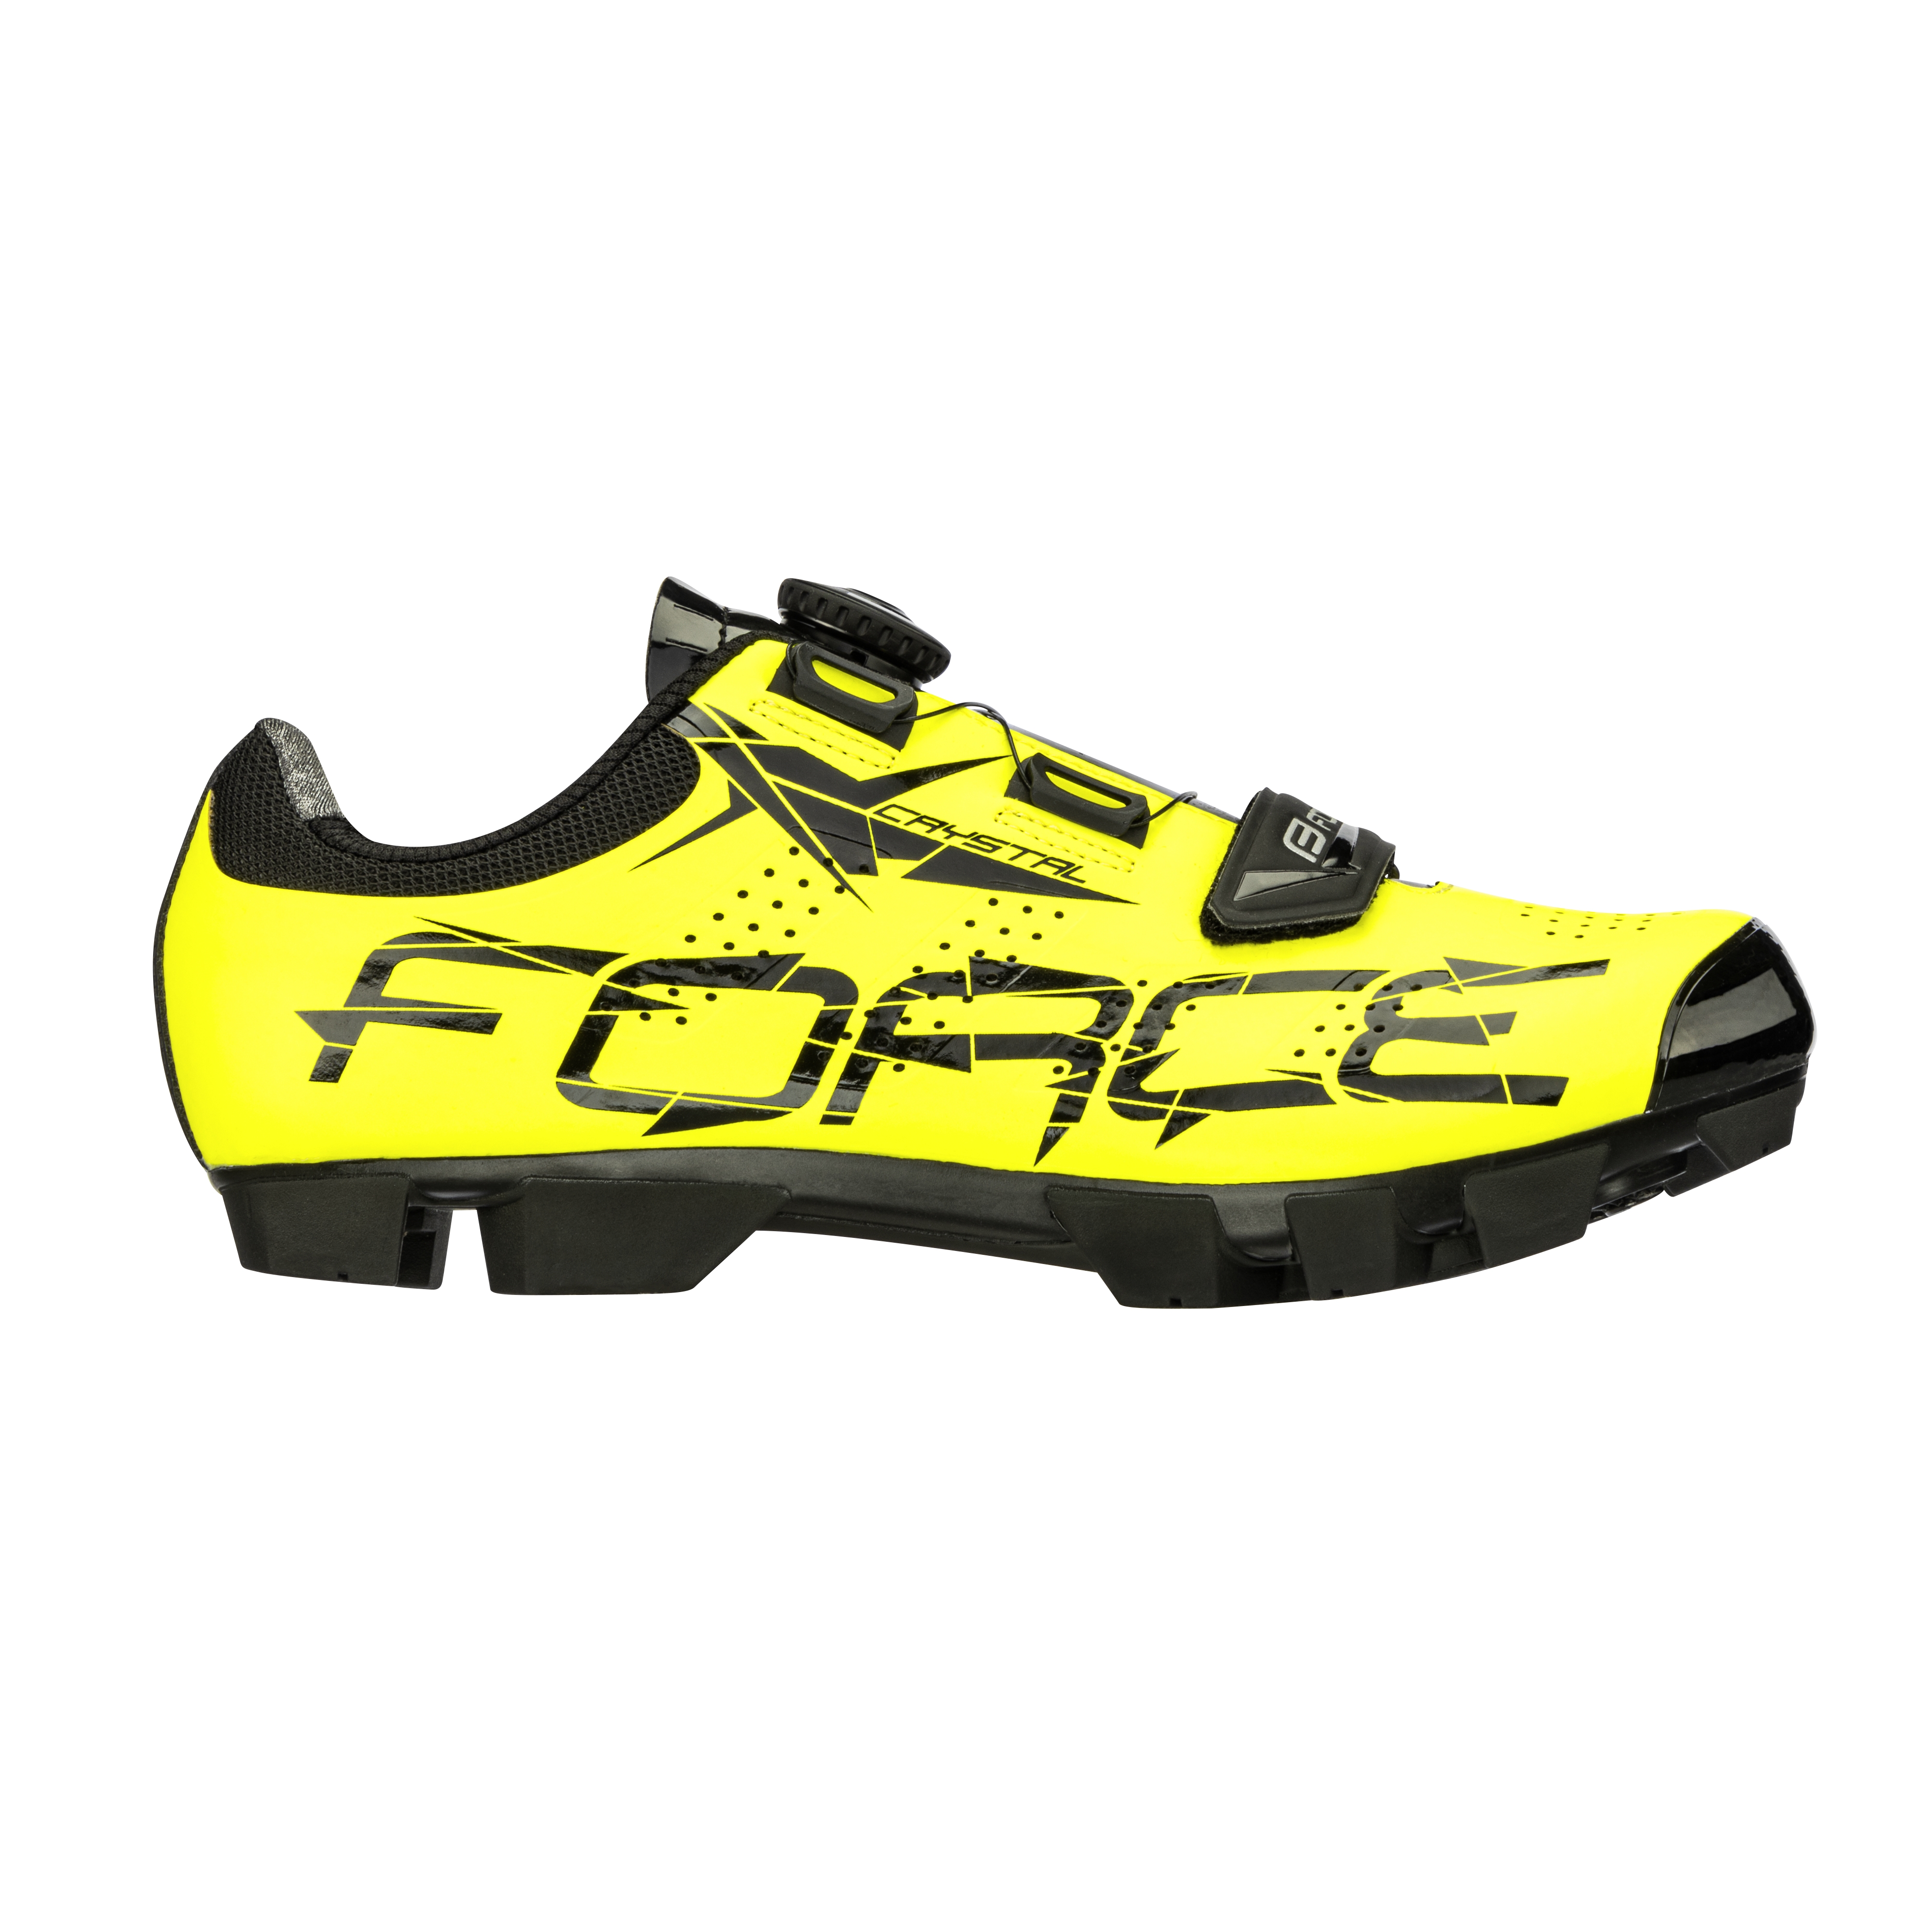 tretry FORCE MTB CRYSTAL, fluo 38